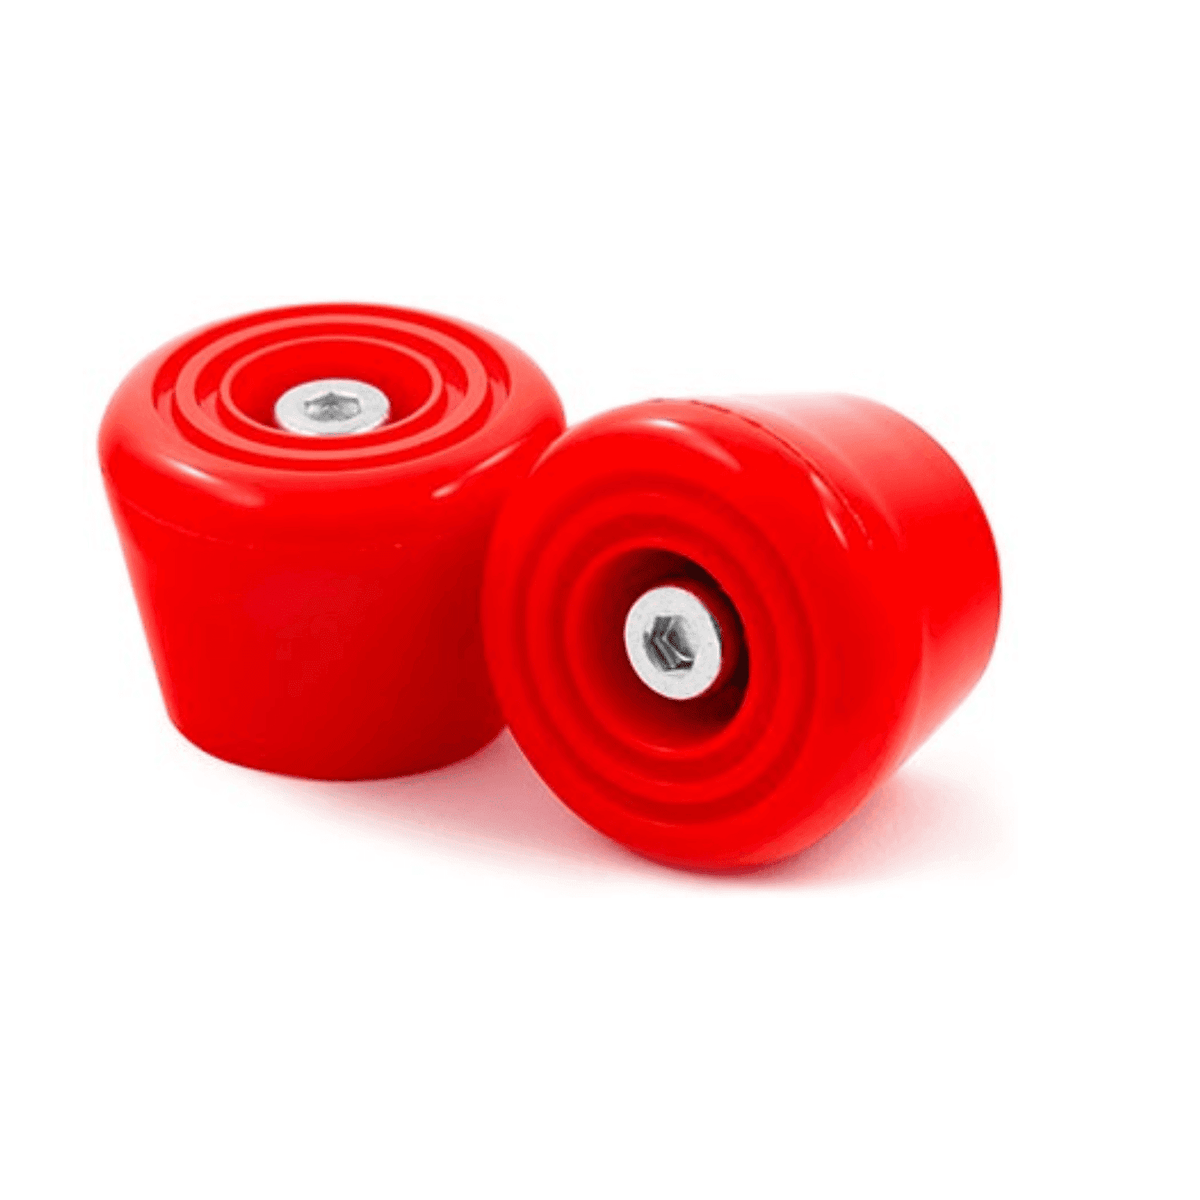 Rio Roller Toe Stops with Bolts X 2 - Red